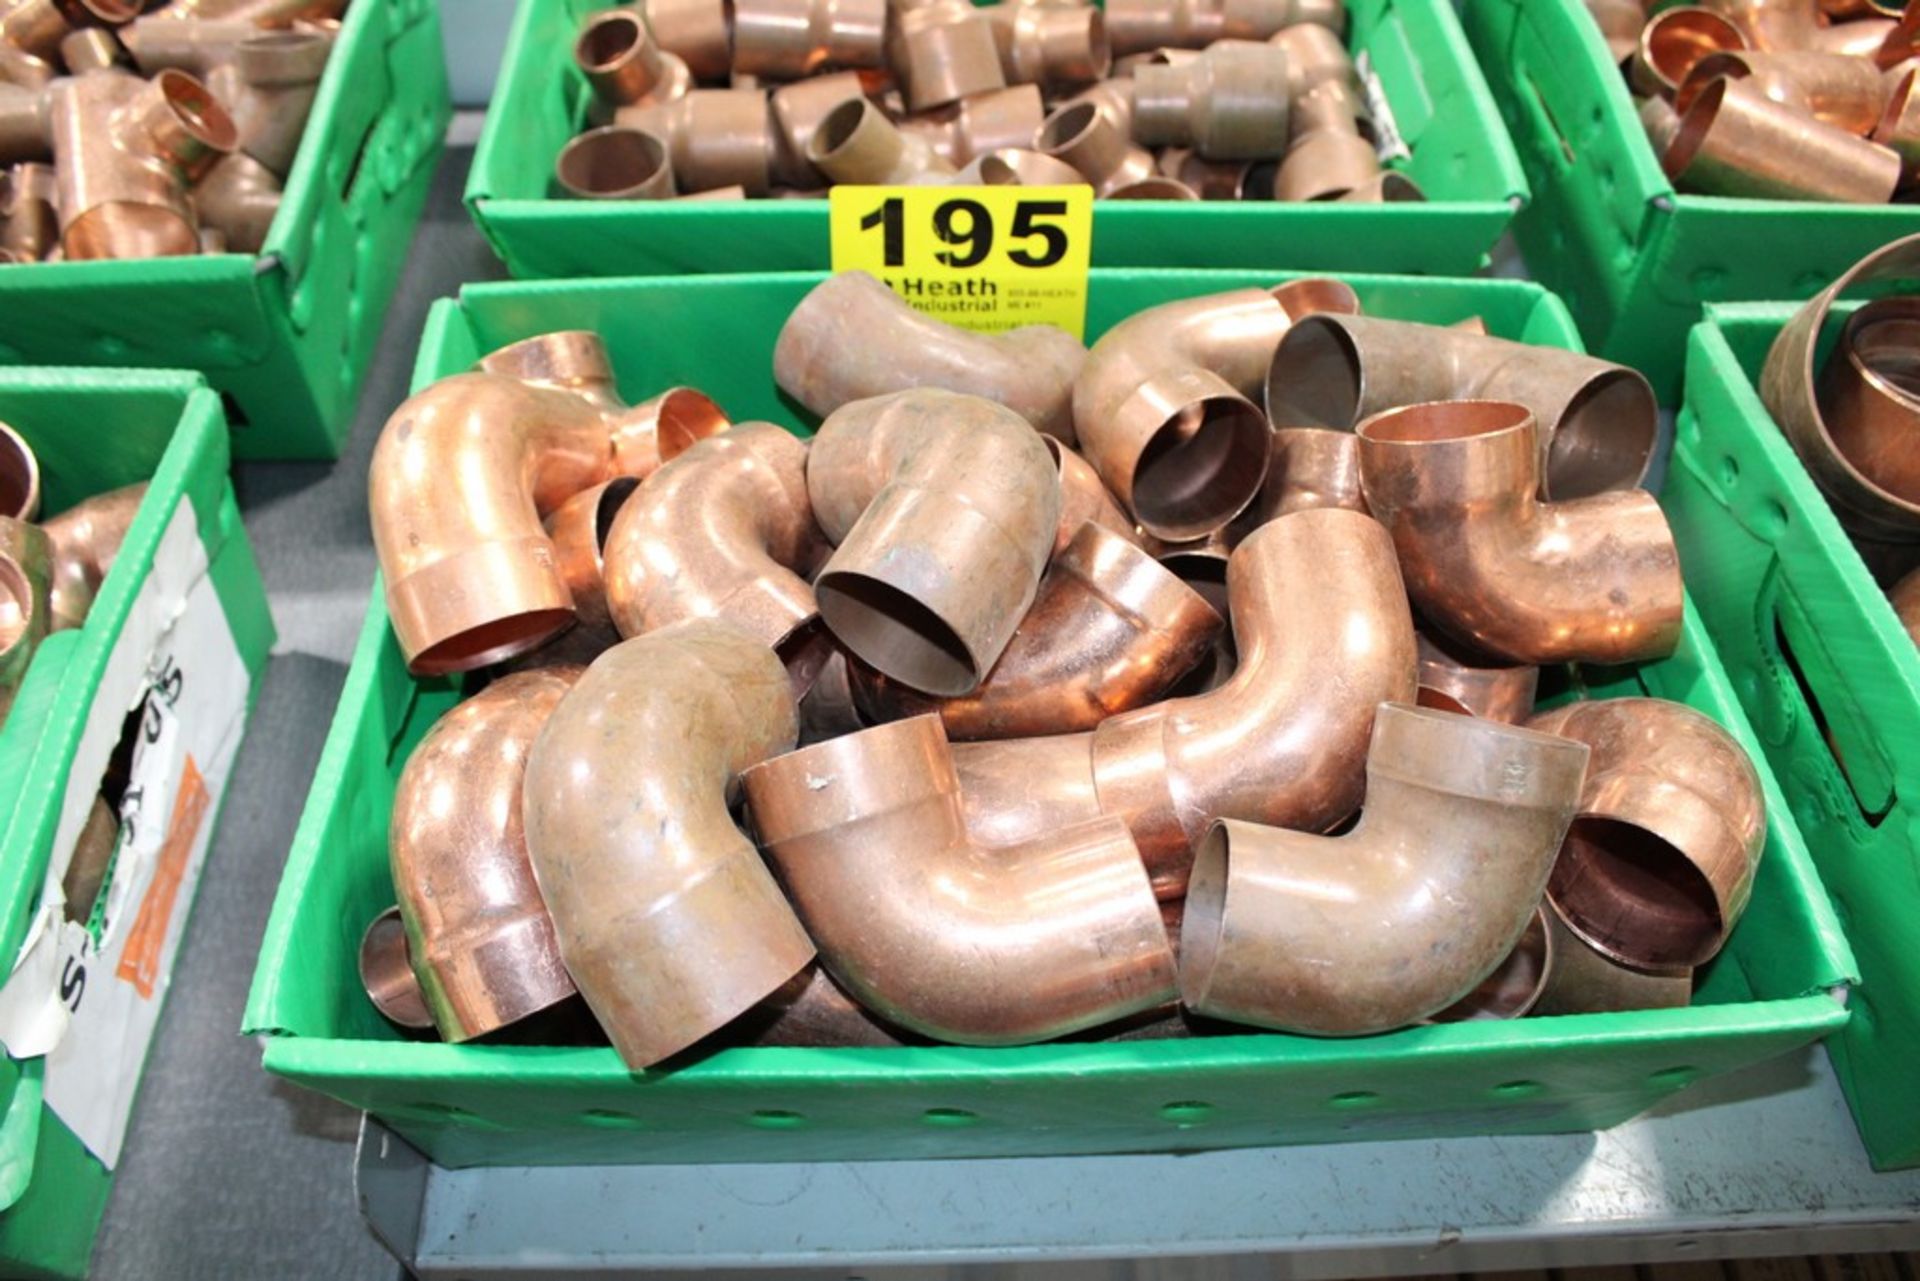 ASSORTED LARGE COPPER PIPE FITTINGS IN BOX